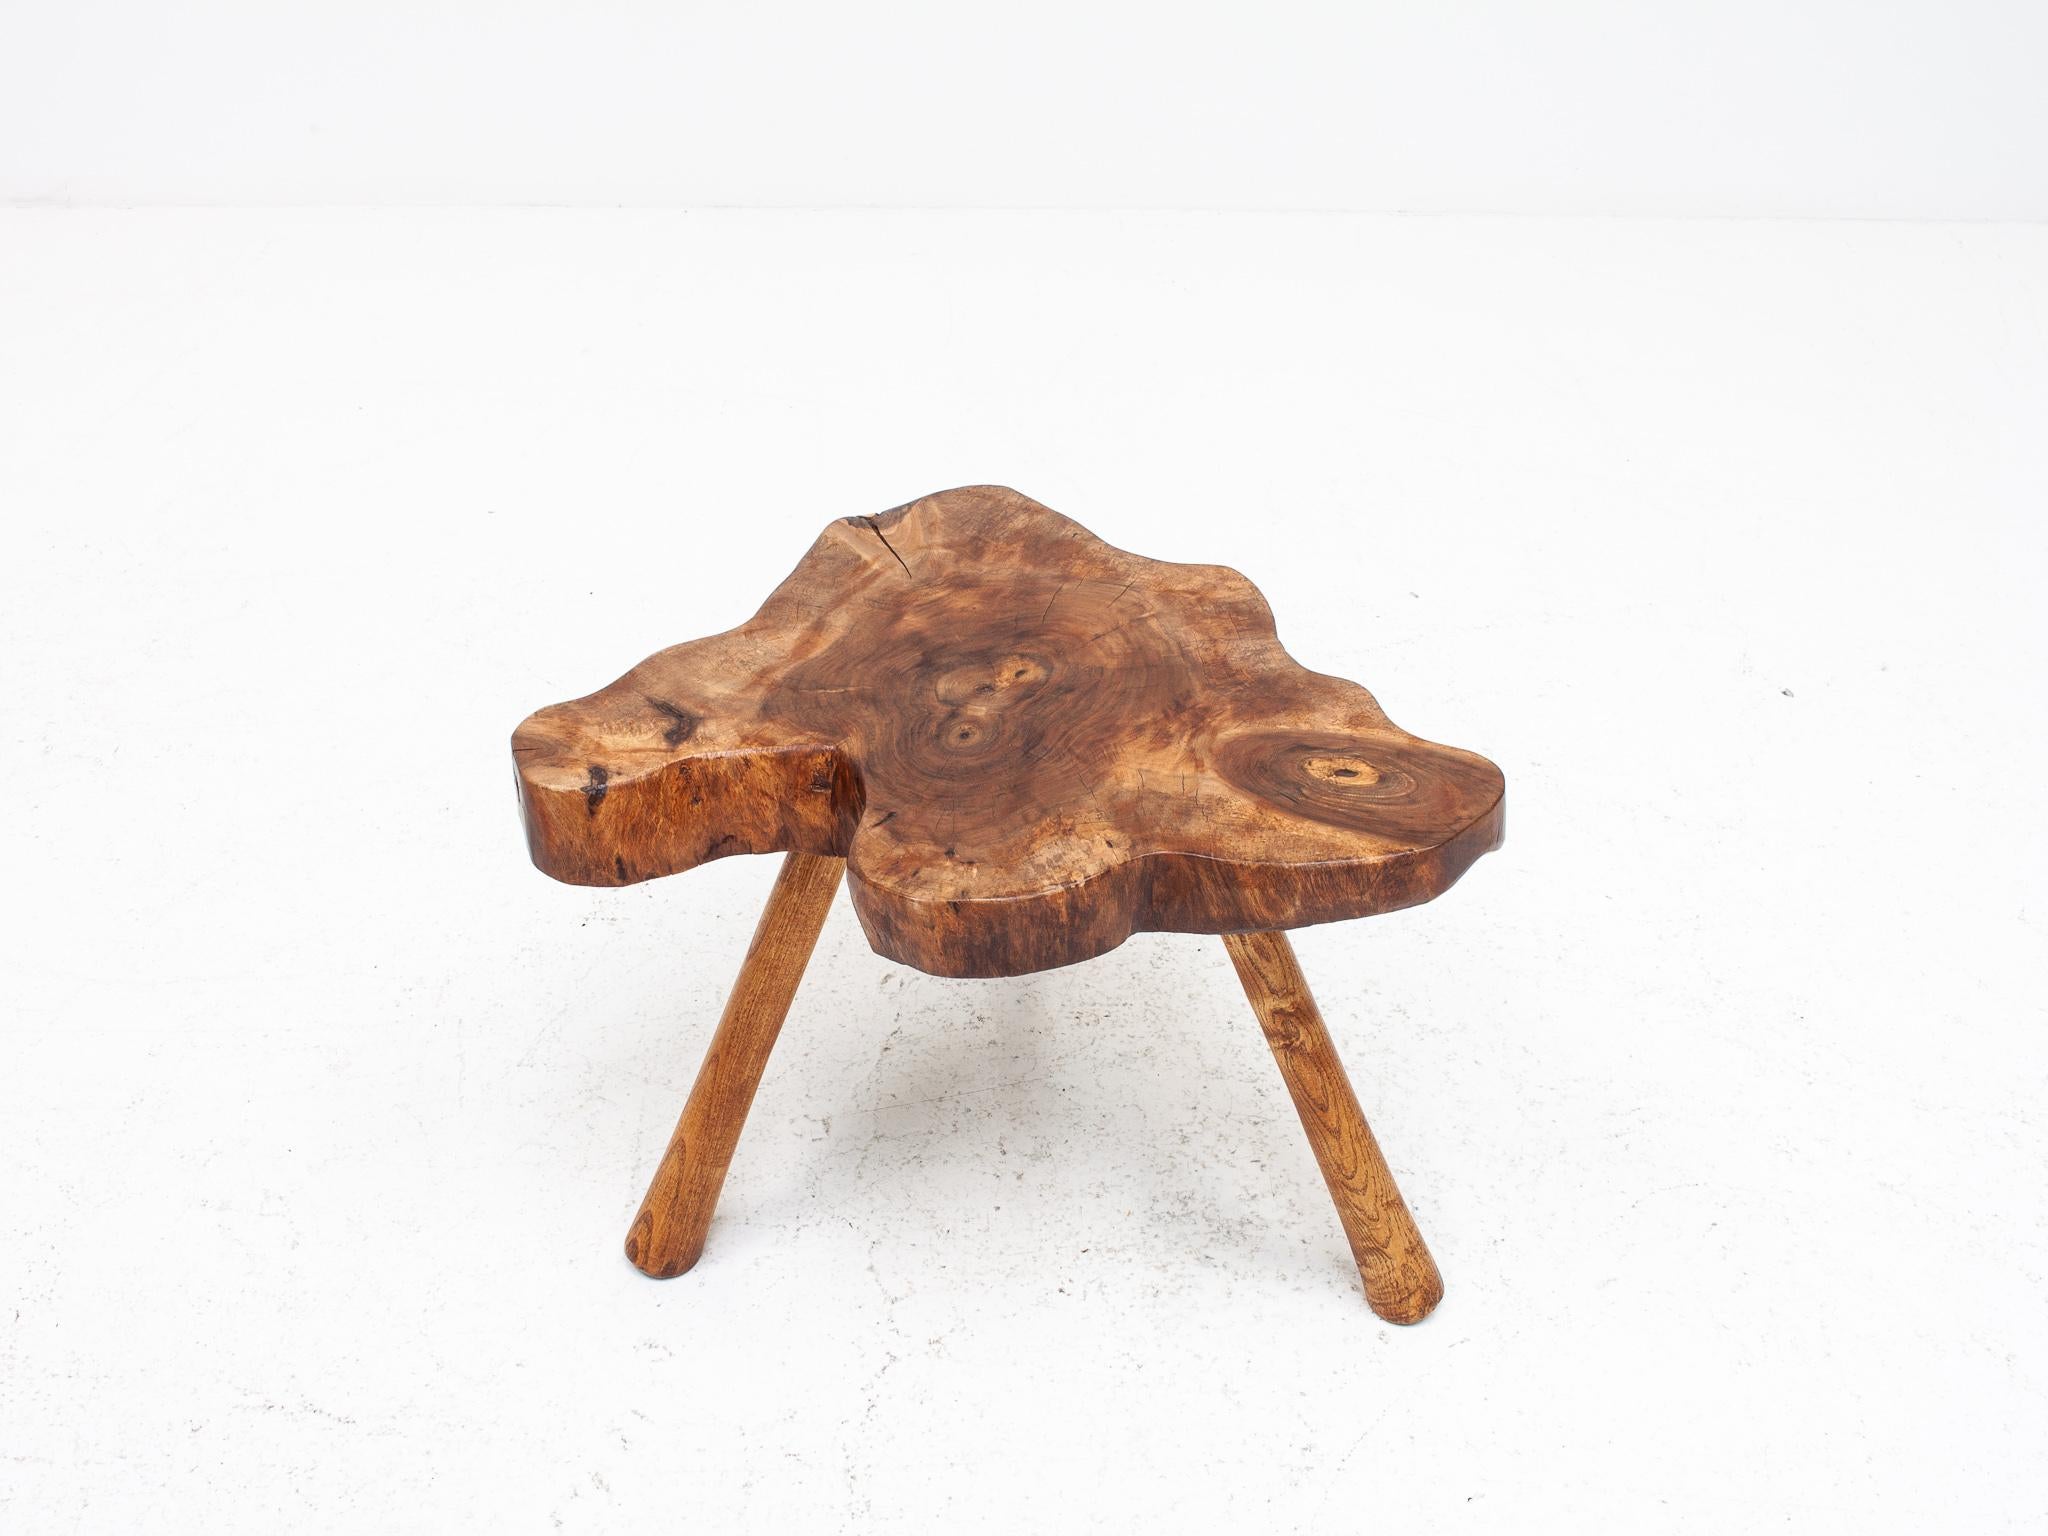 A very attractive 1960s rustic, Wabi-Sabi, vintage wriggle stool.

Condition: In good vintage condition, refinished. Being vintage do expect some light signs of age.

Dimensions:
Width: 40 cm / 15.74 inches
Depth: 34 cm / 13.38 inches
Height: